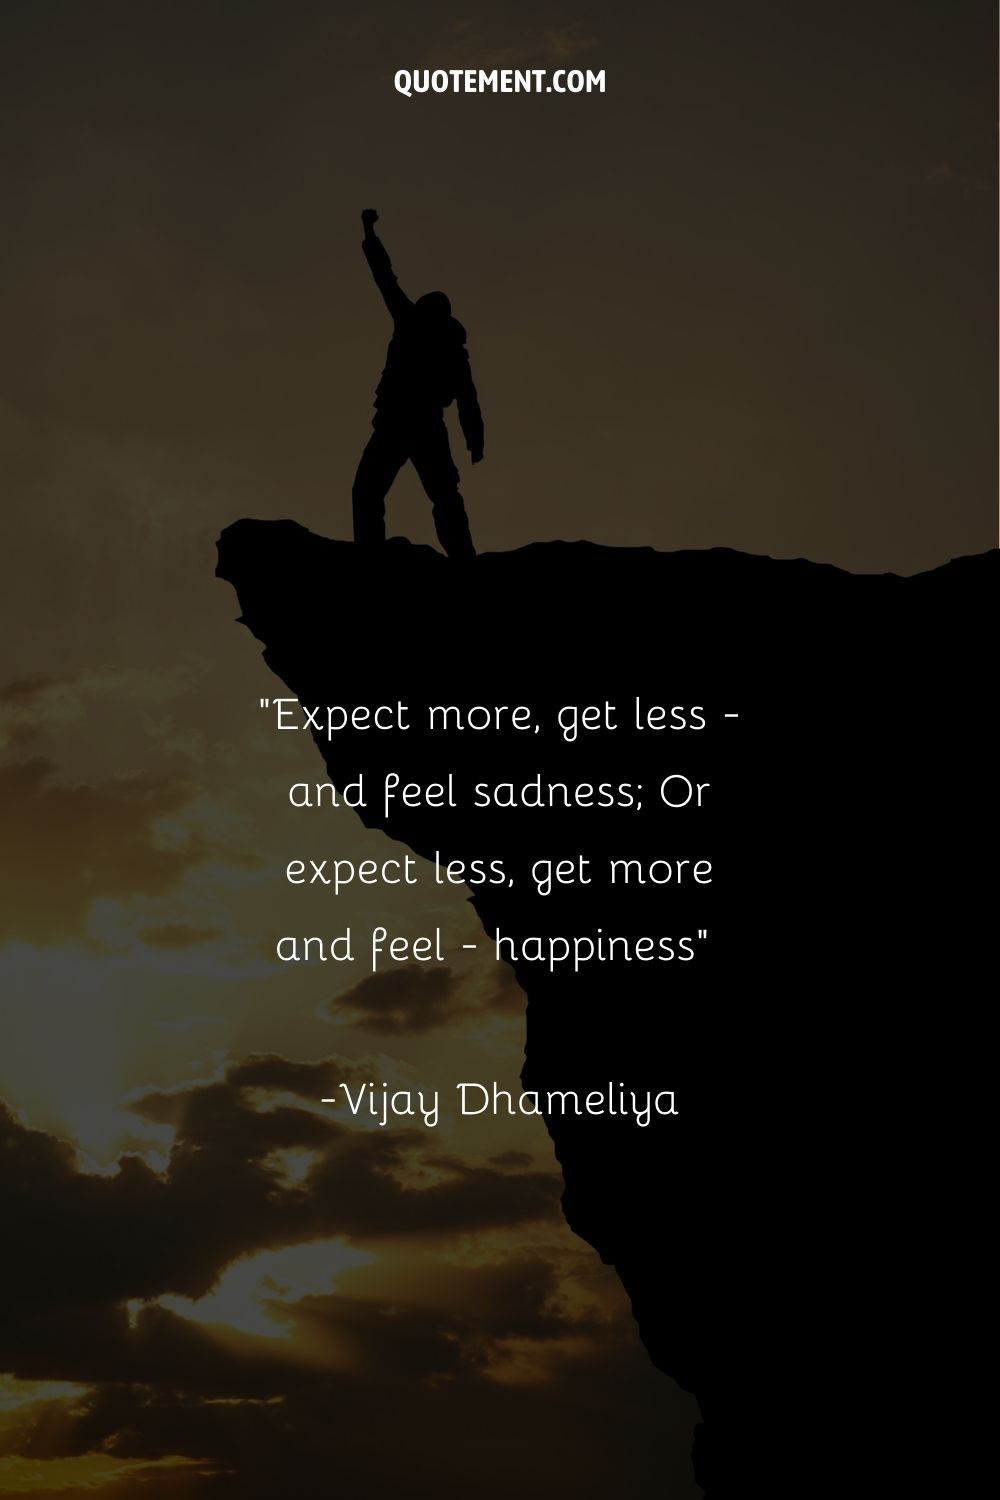 Expect more, get less - and feel sadness; Or expect less, get more and feel - happiness